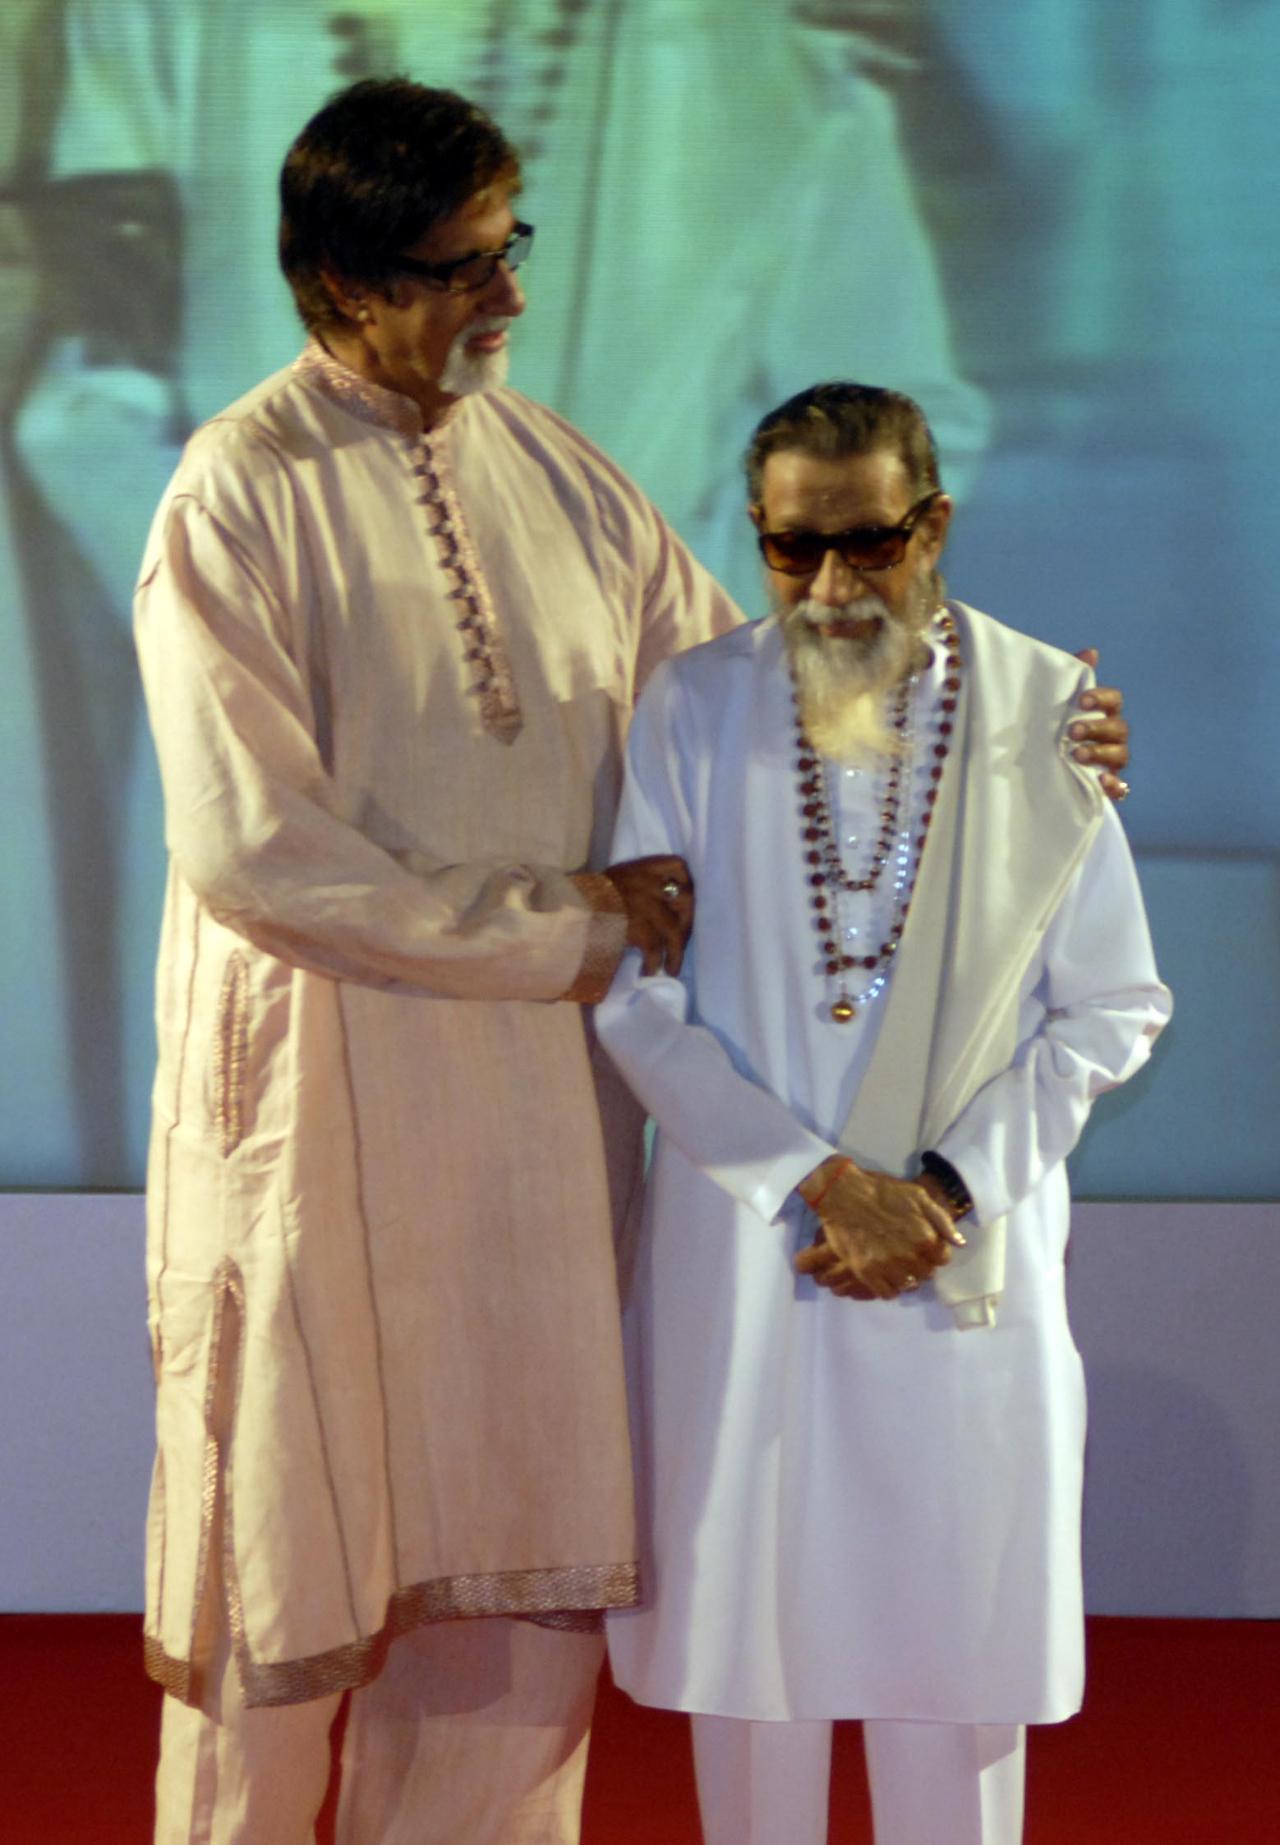 Film star Amitabh Bachchan and Bal Thackeray during the launch of Umeed, a music album by Aditya Uddhav Thackeray, son of Uddhav Thackeray at Rang Sharda. All the songs are penned by the young lad Aditya. Pic/Nimesh Dave